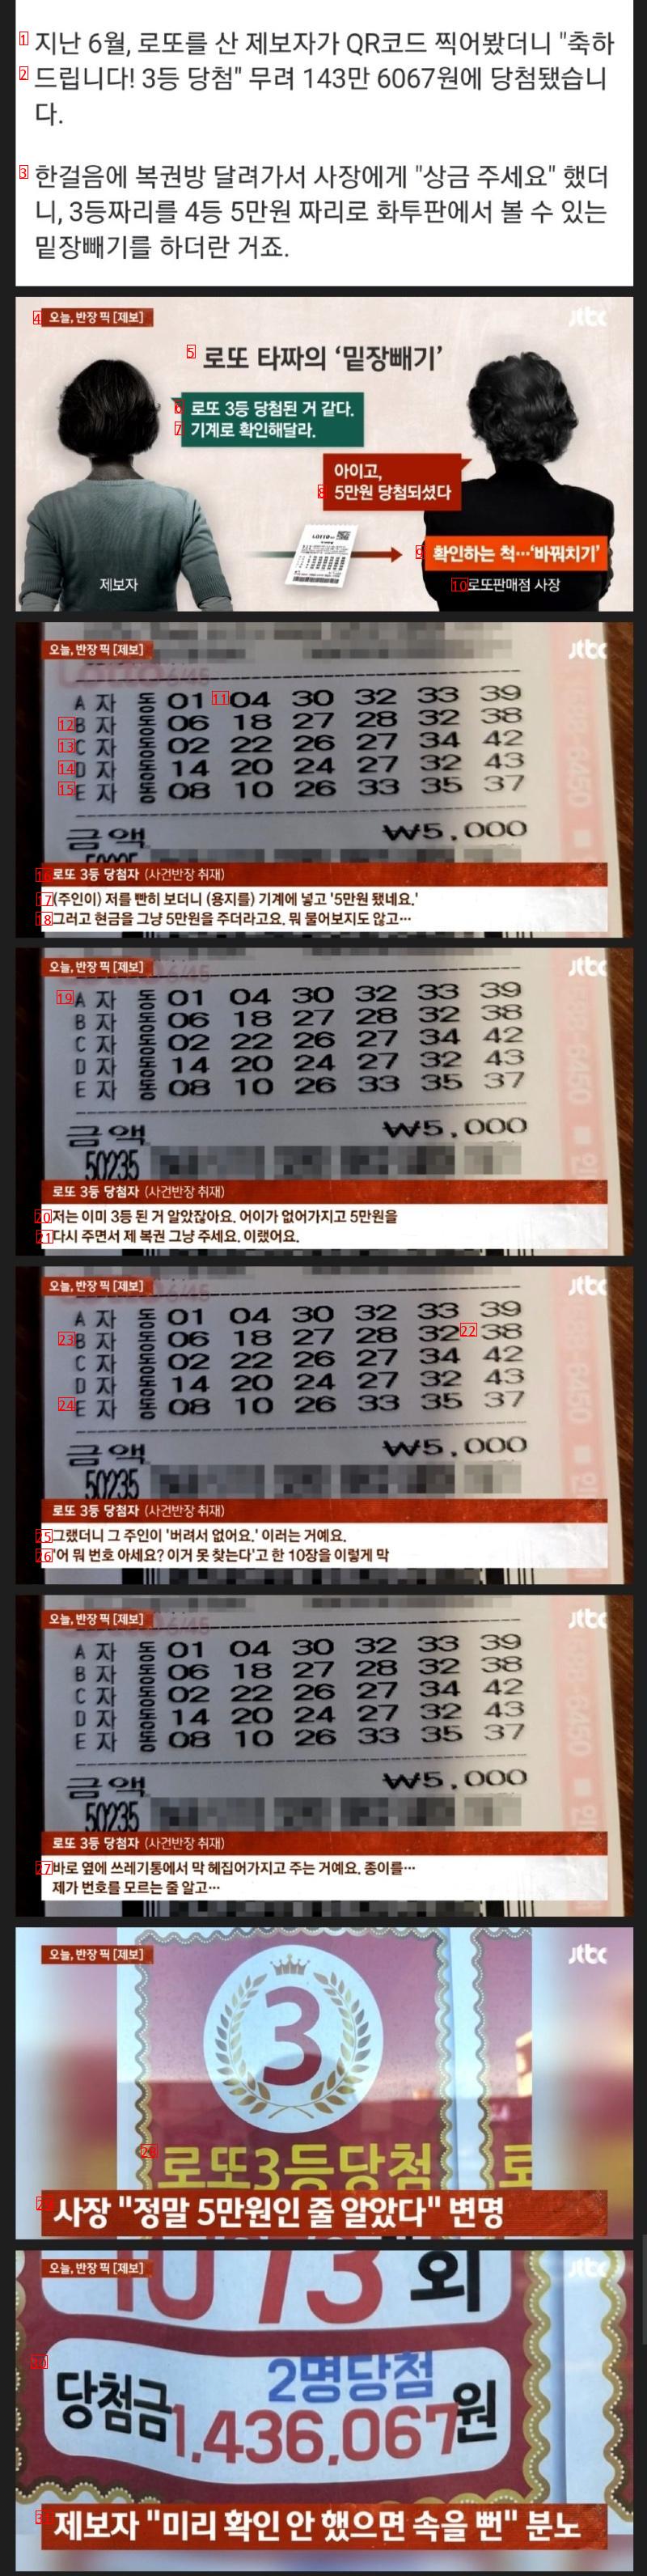 Lotto shop that took out tricks.jpg